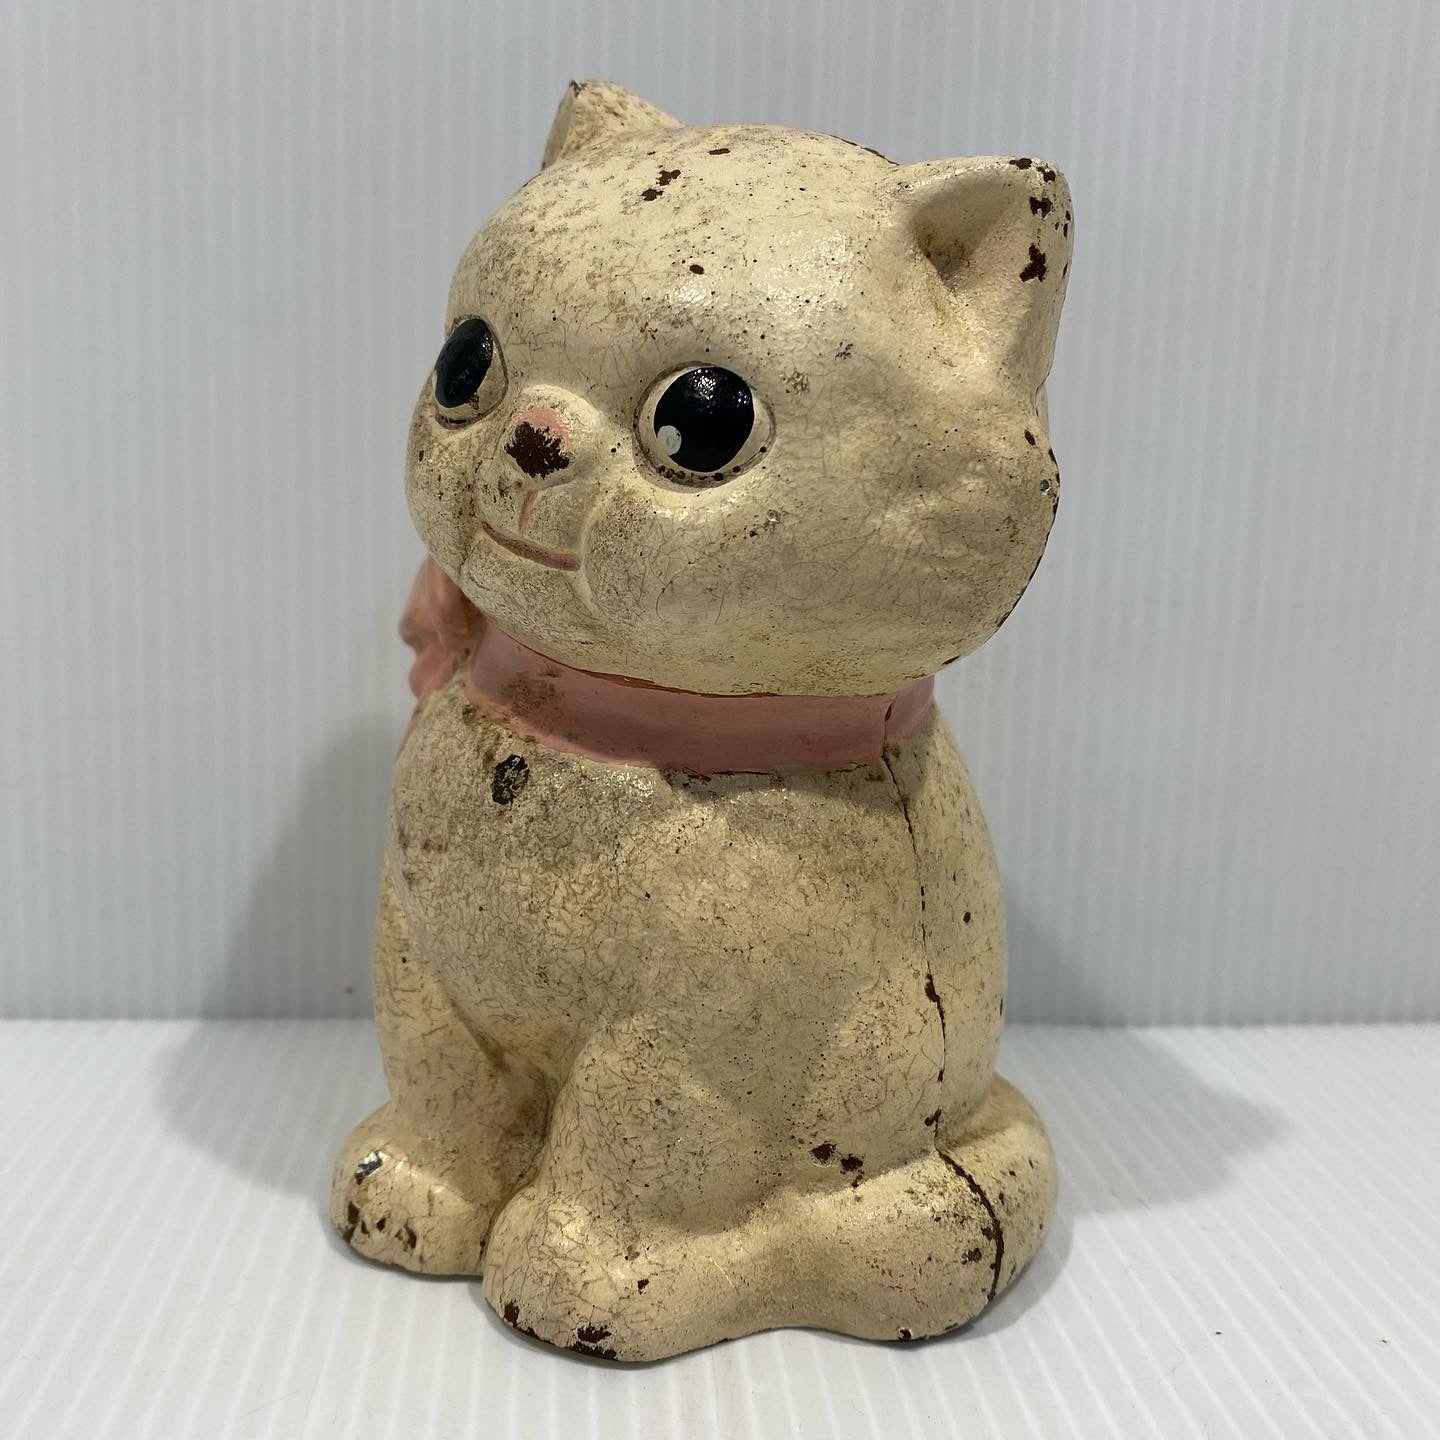 Antique, original, Cast Iron "KITTY BANK" made by Hubley. 1920s